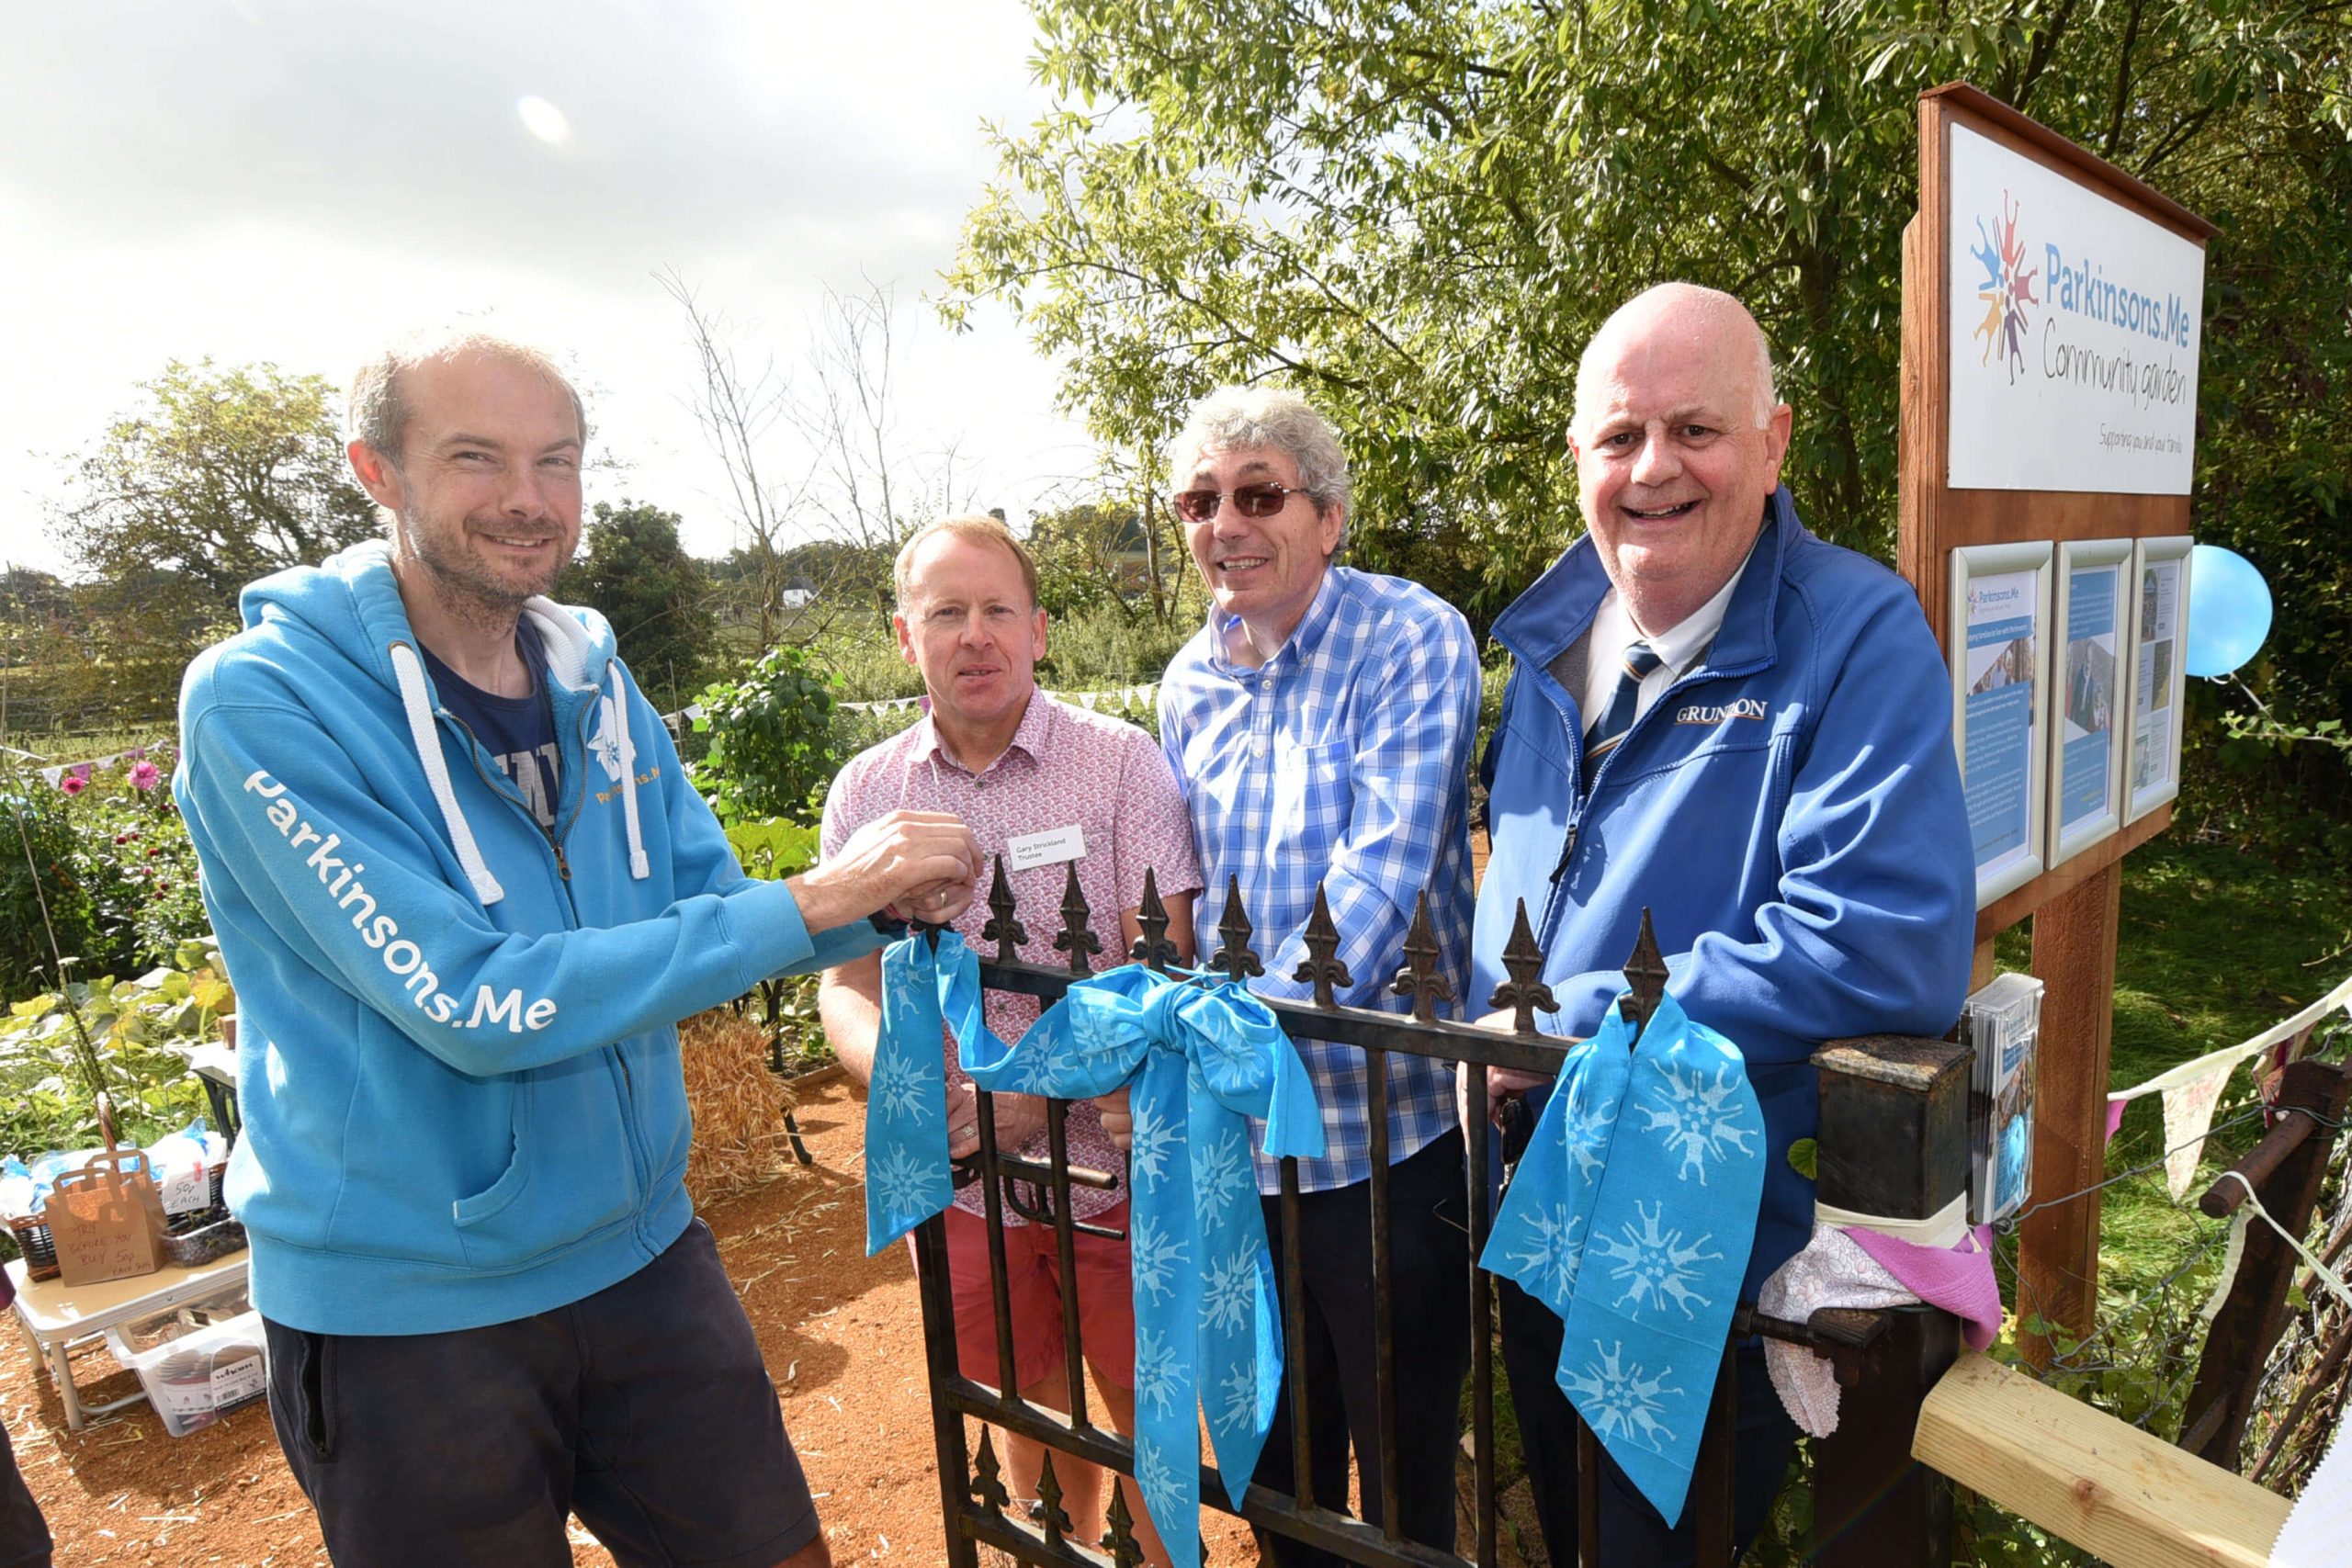 Pictured from left at the official opening of the garden: Ewan Stutt, Gary Strickland, Paul Mayhew-Archer and Pete Moss.